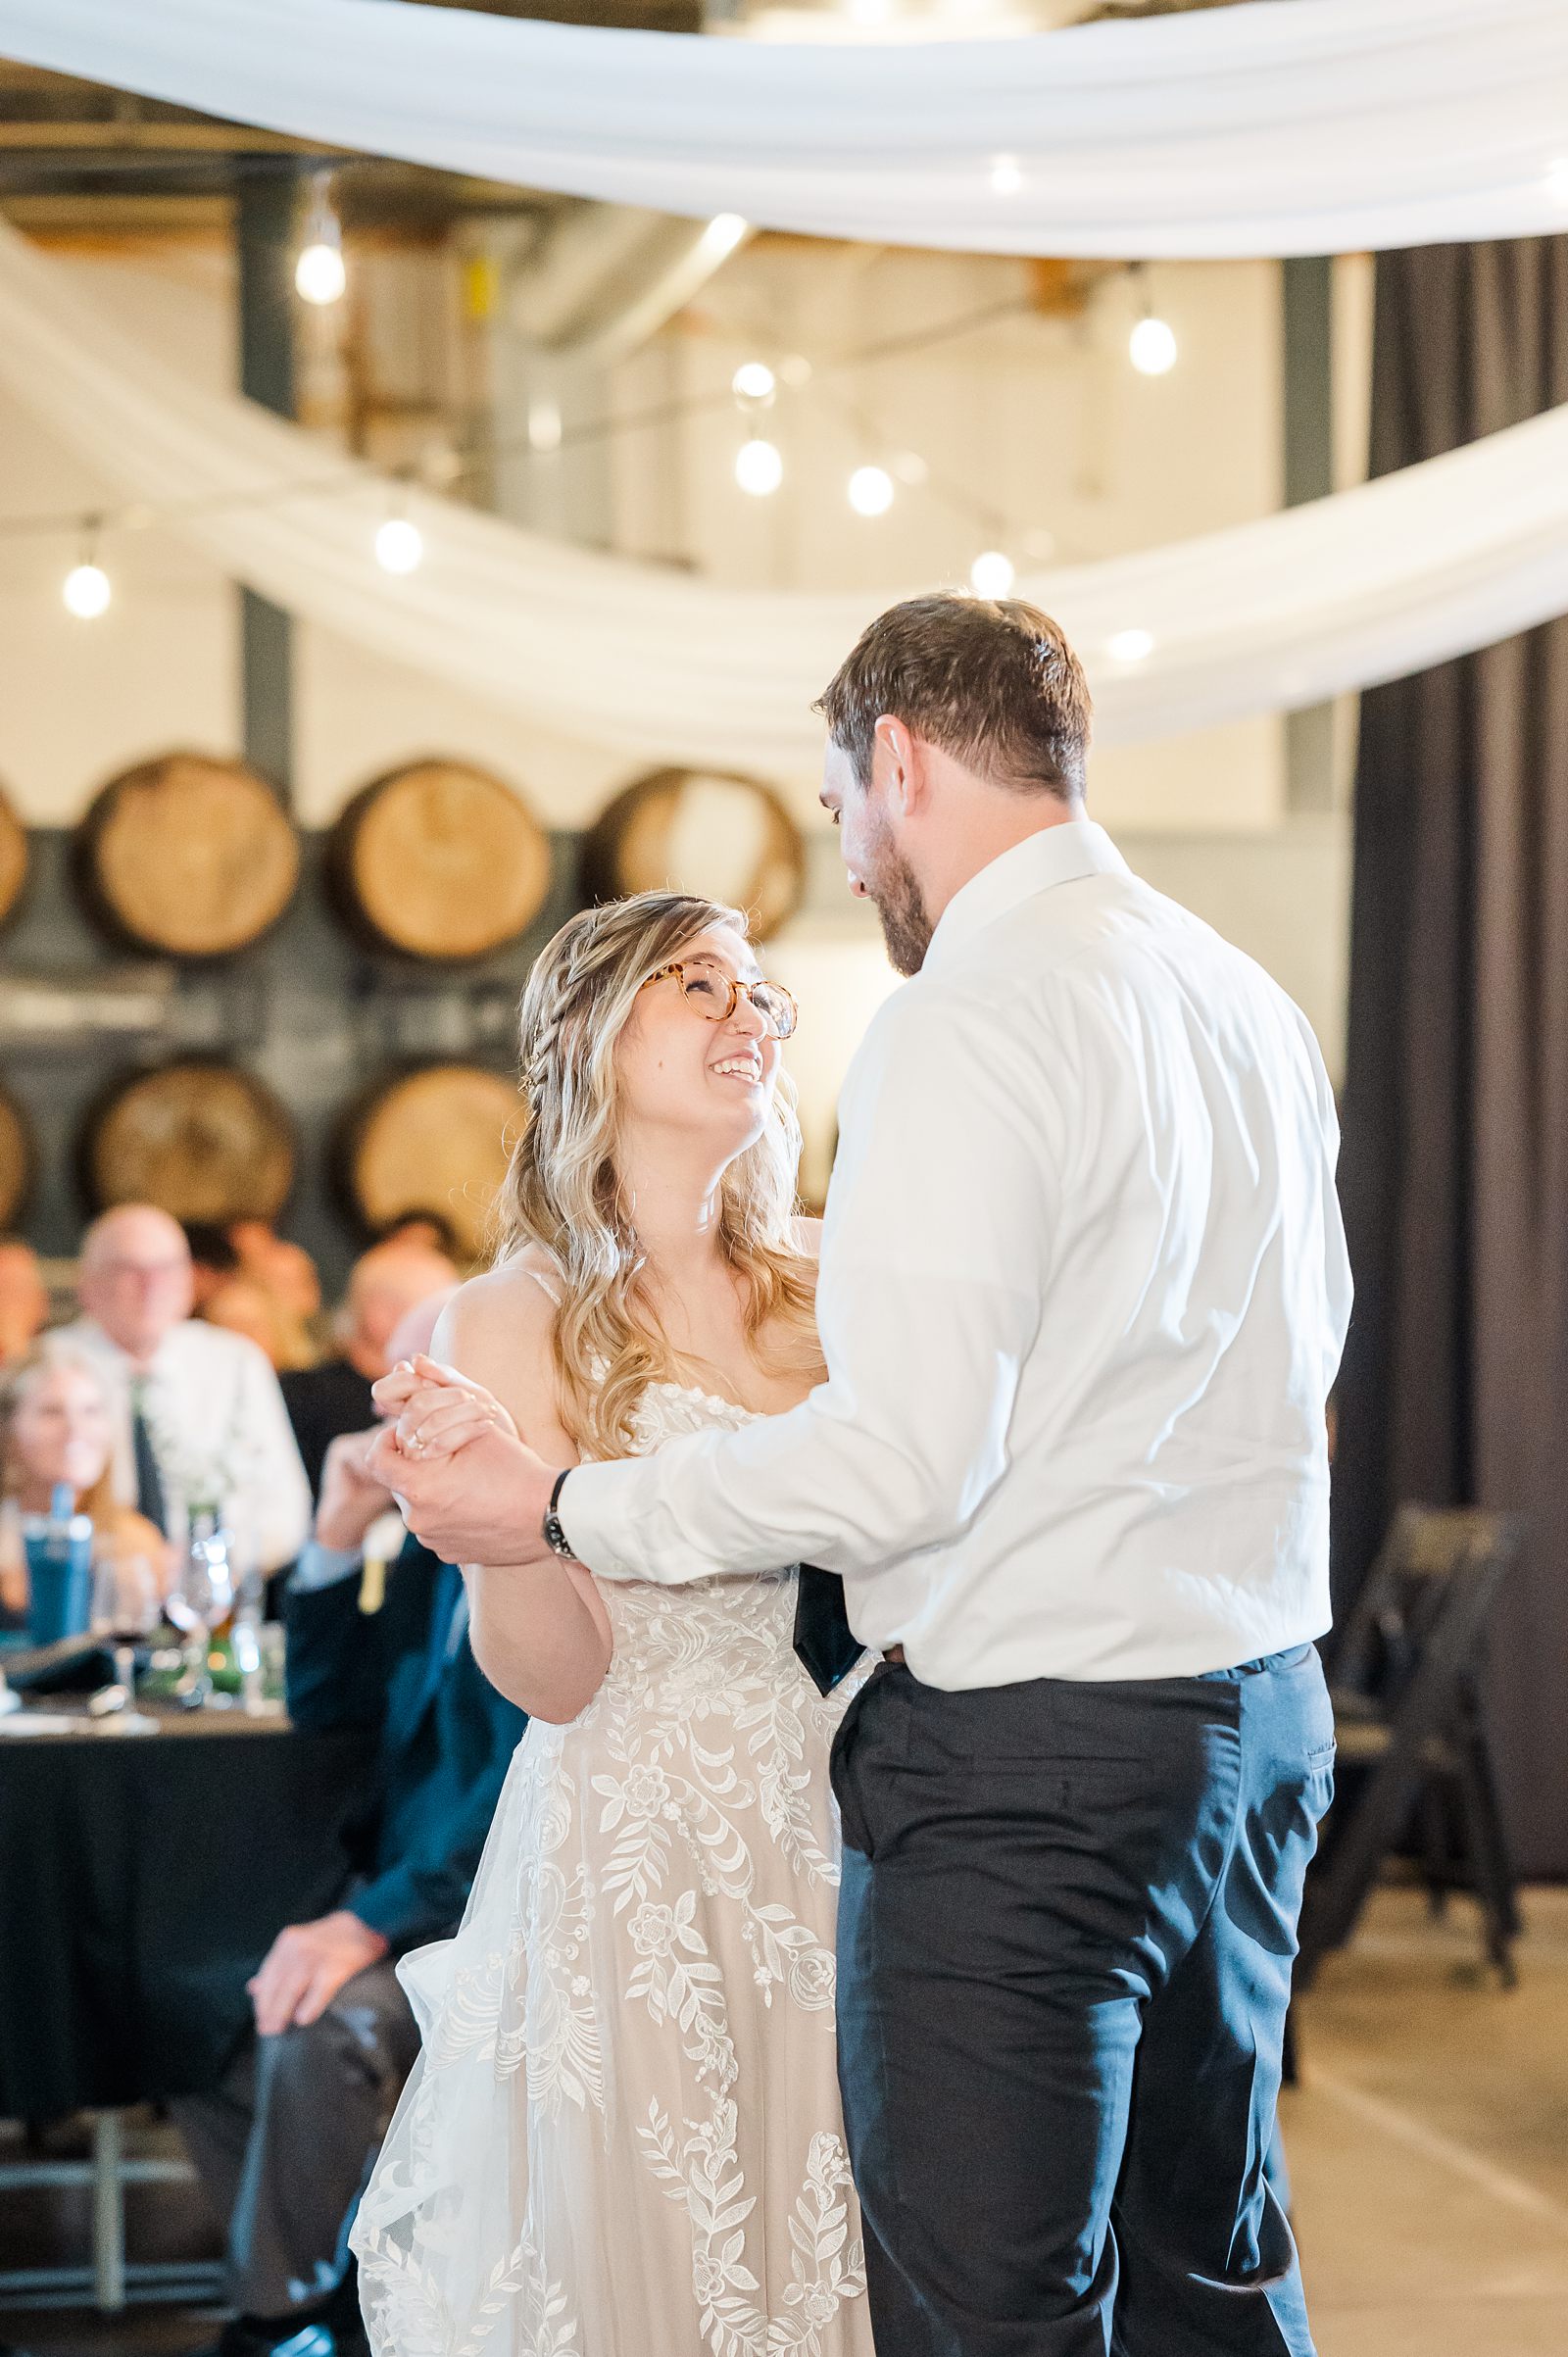 Bride and Groom First Dance at Spring Triple Crossing Beer Wedding Reception